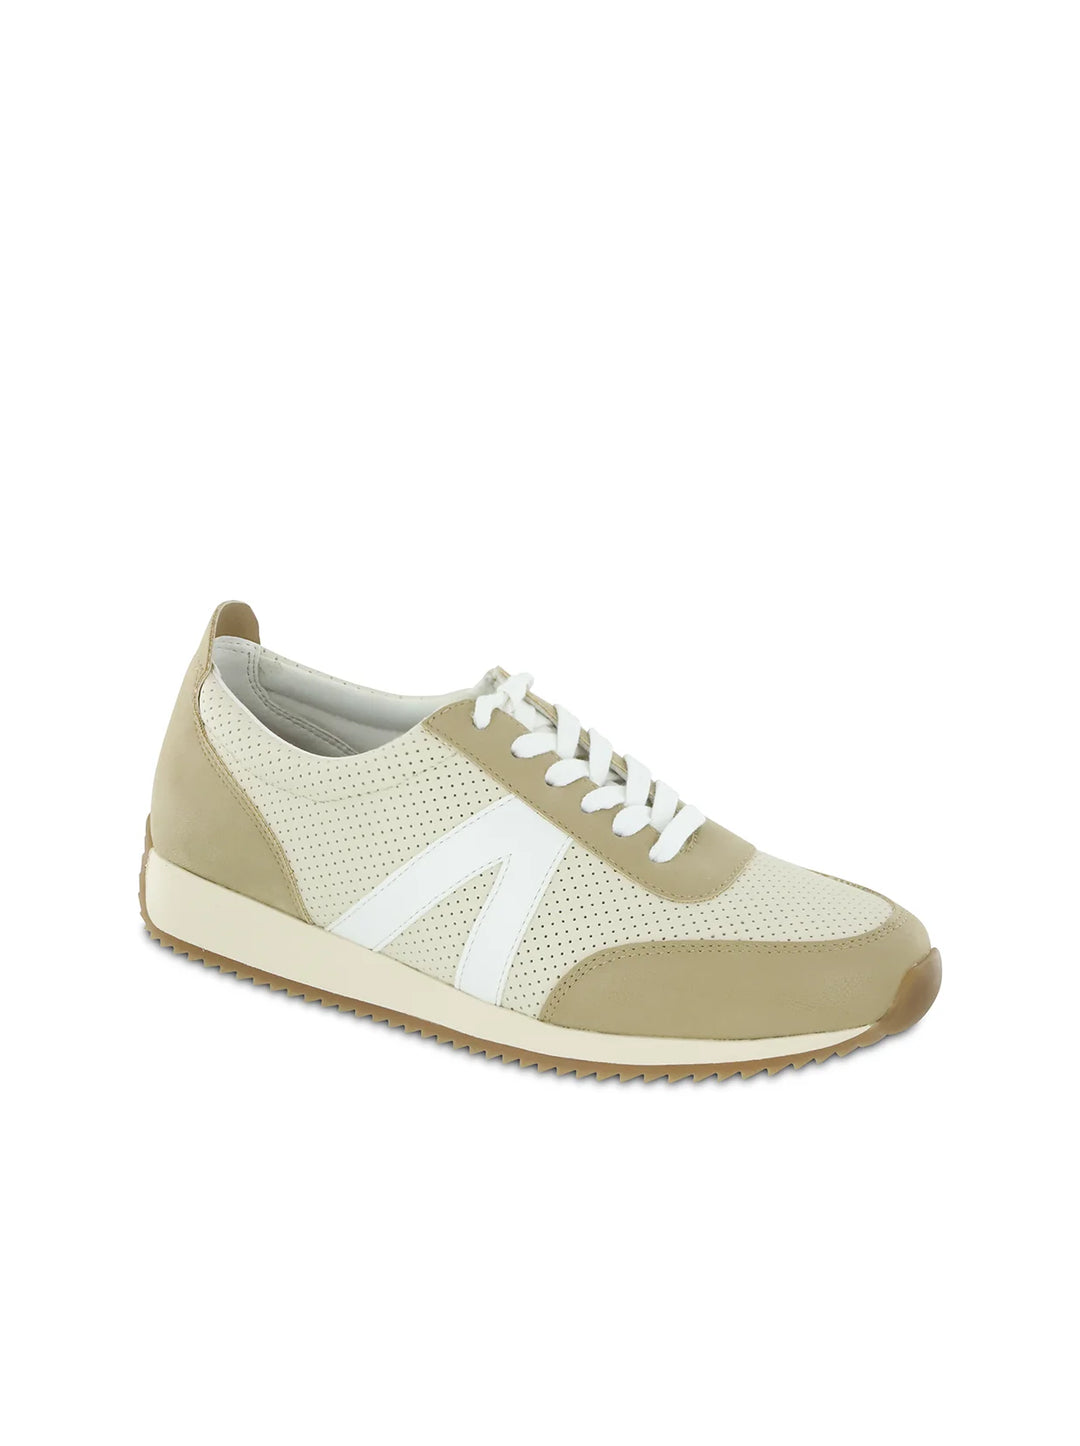 The MIA Kable Ivory/Natural Sneaker